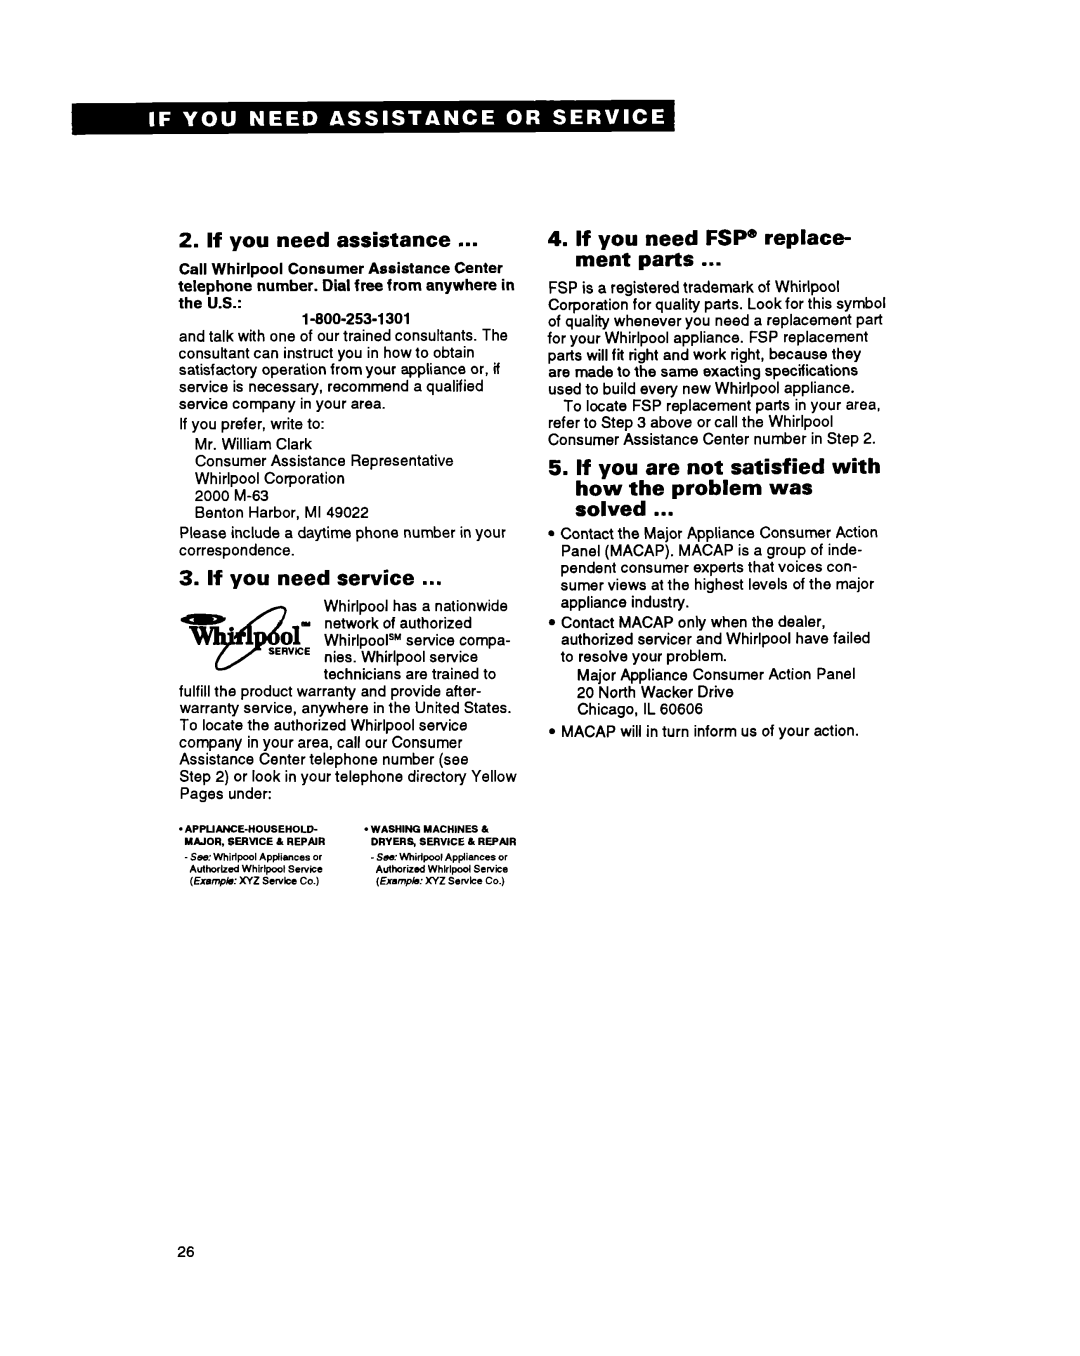 Whirlpool SF314PSY manual If you need assistance n, If you need service, If you need FSP” replace- ment parts 